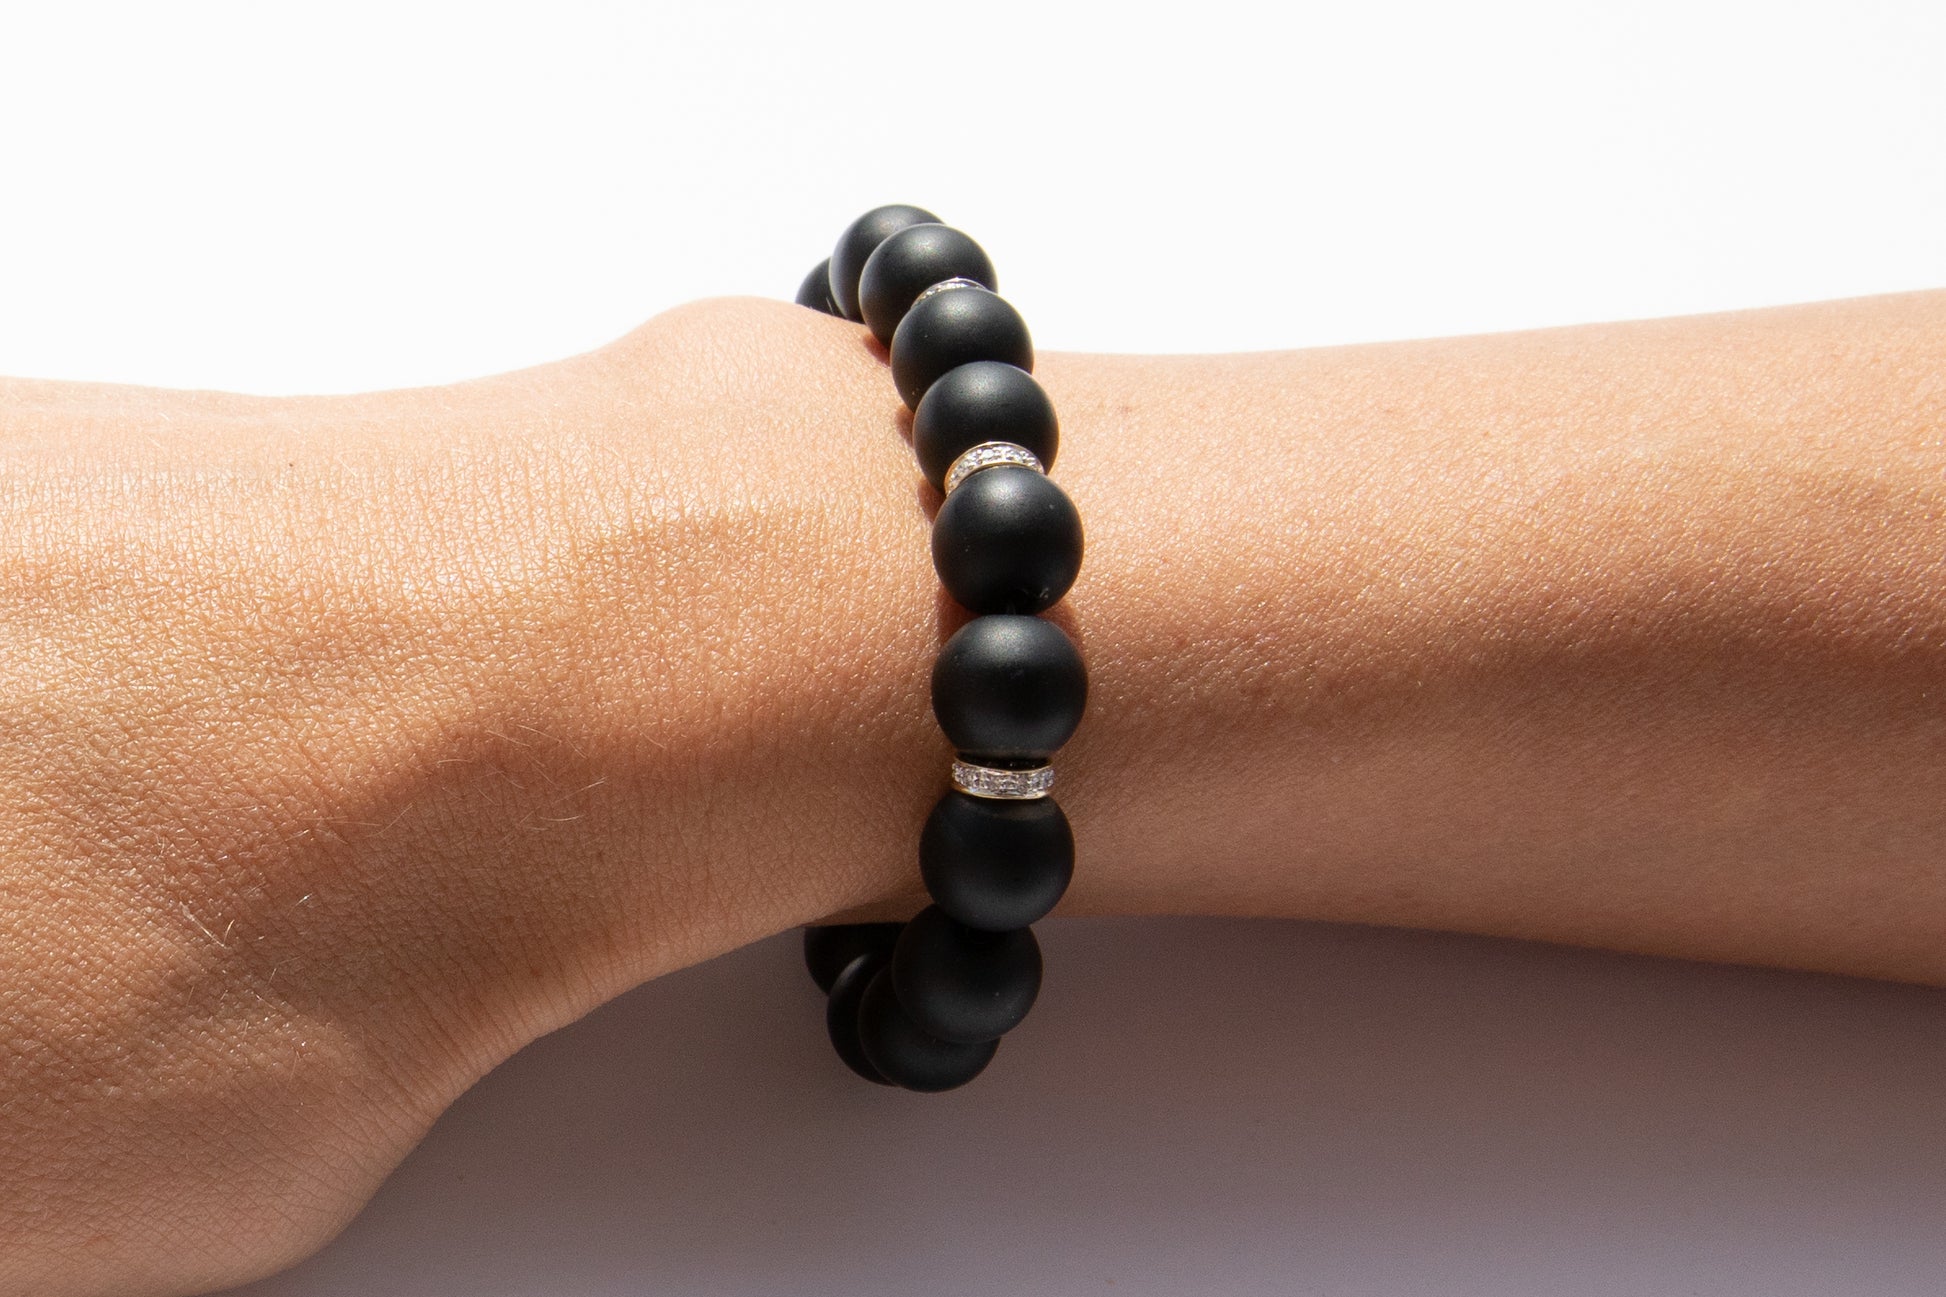 Black Onyx Beaded Bracelet With Three Pavé Diamond Spacer Beads Set in 14k Gold Pictured On Arm